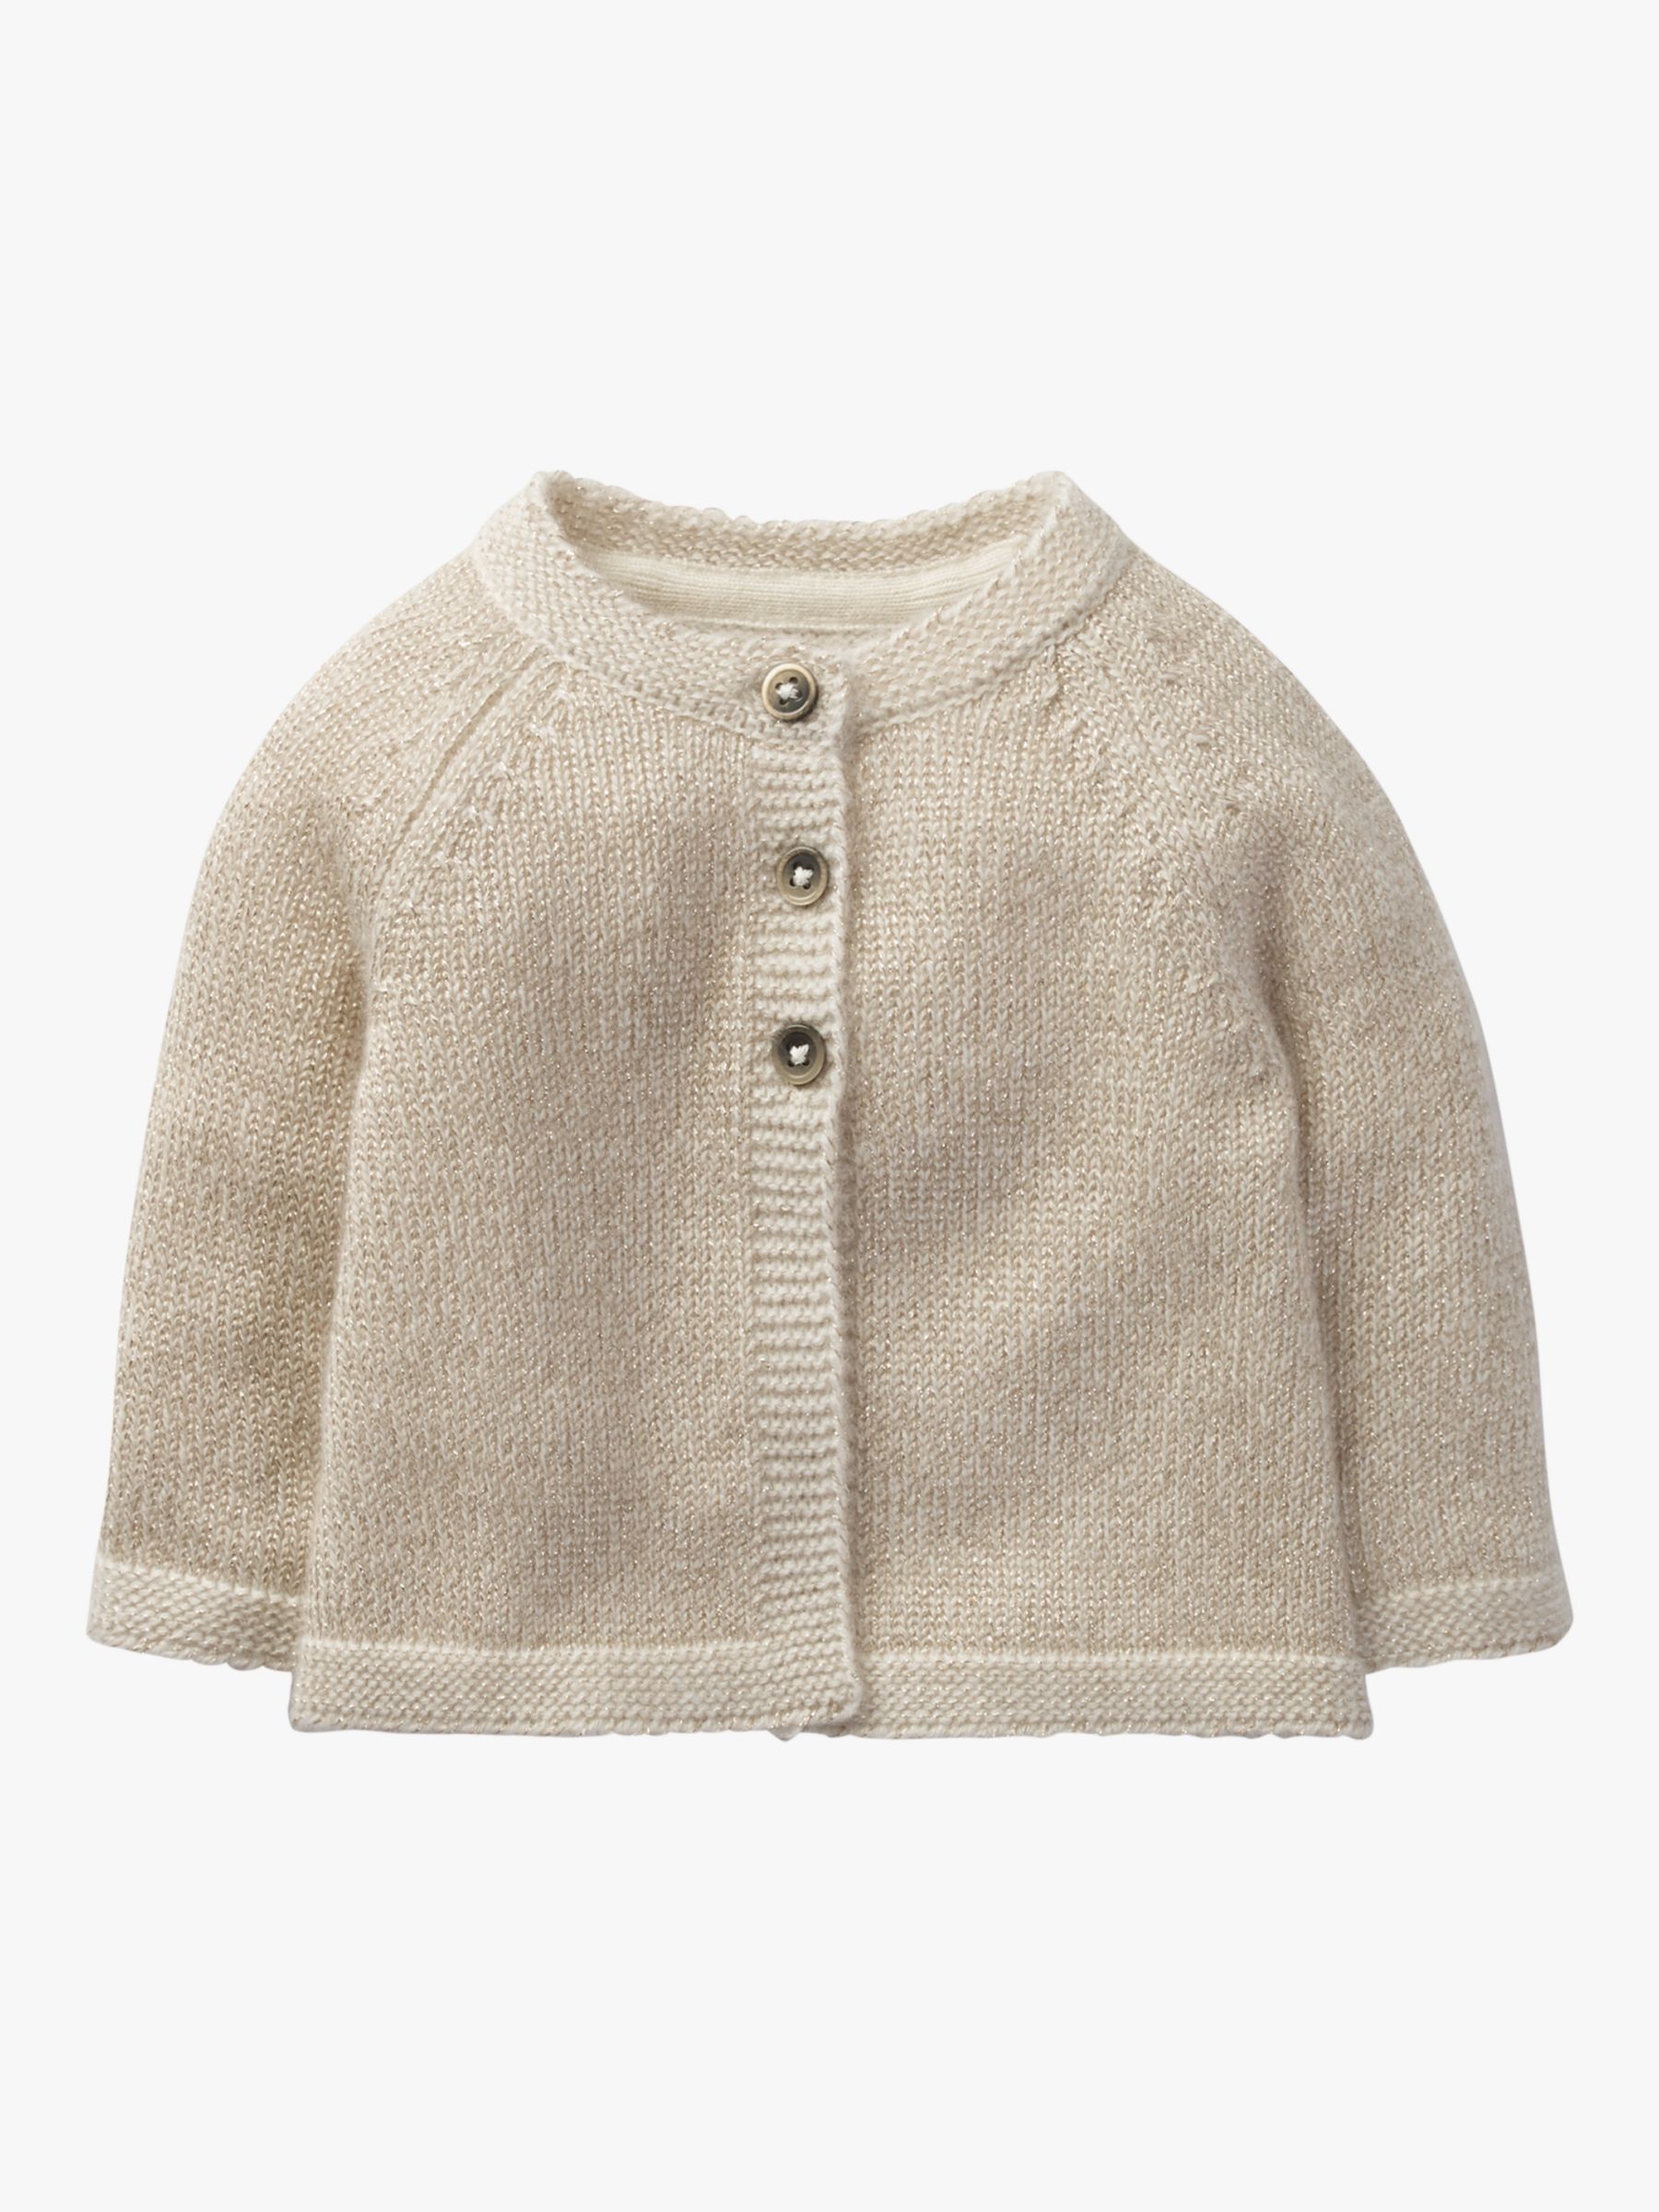 Mini Boden Baby Cashmere Cardigan, Gold 